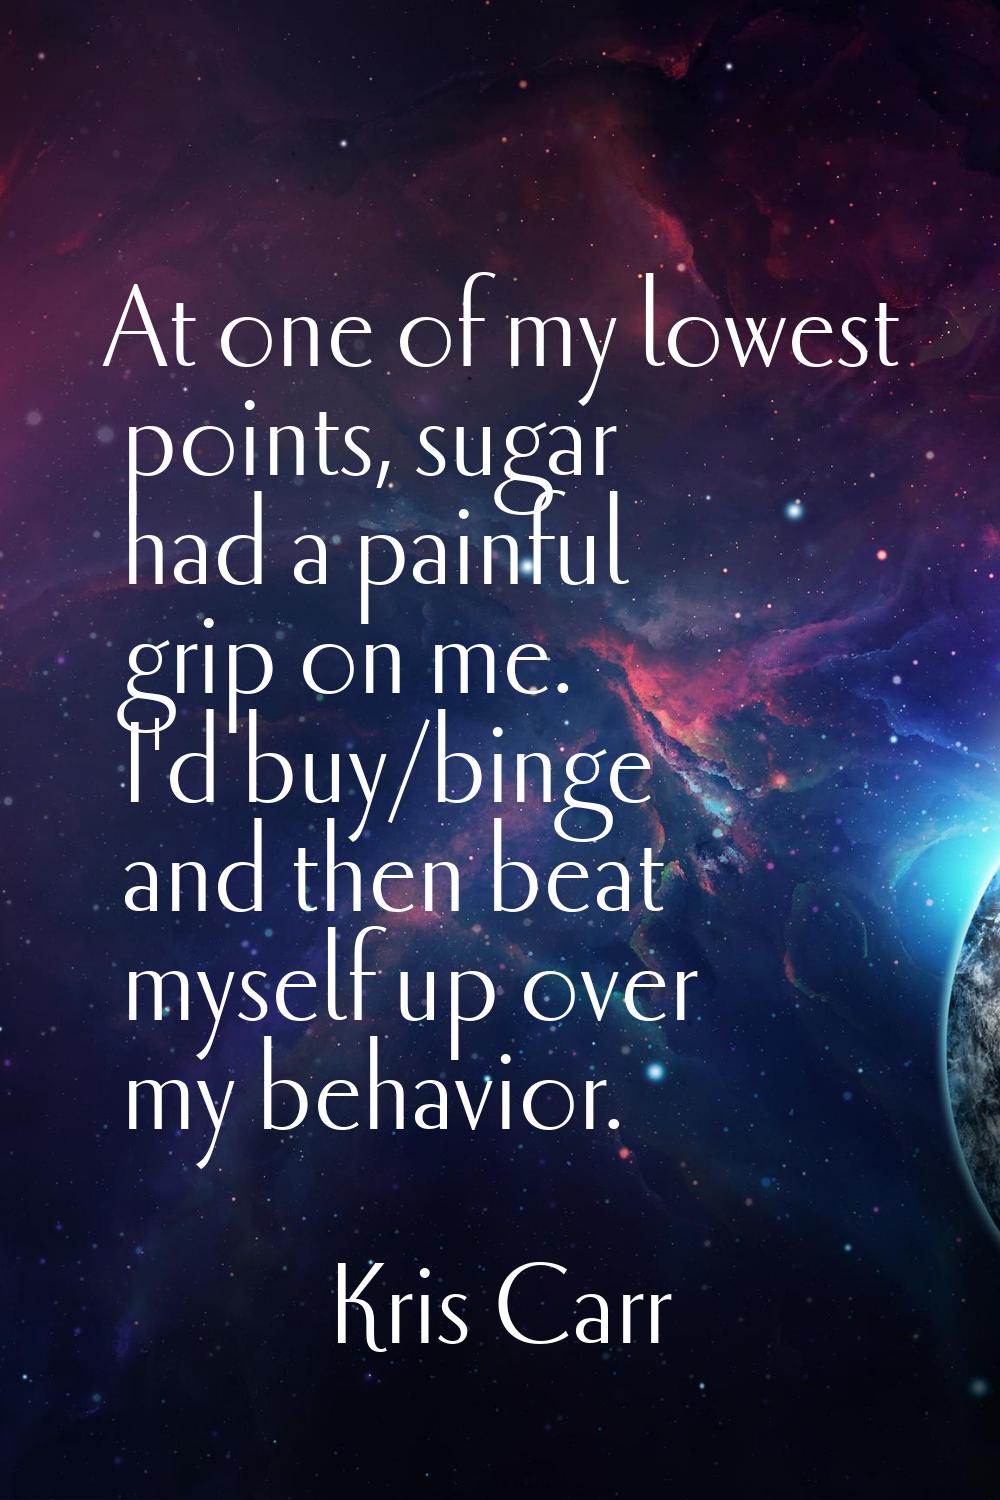 At one of my lowest points, sugar had a painful grip on me. I'd buy/binge and then beat myself up o